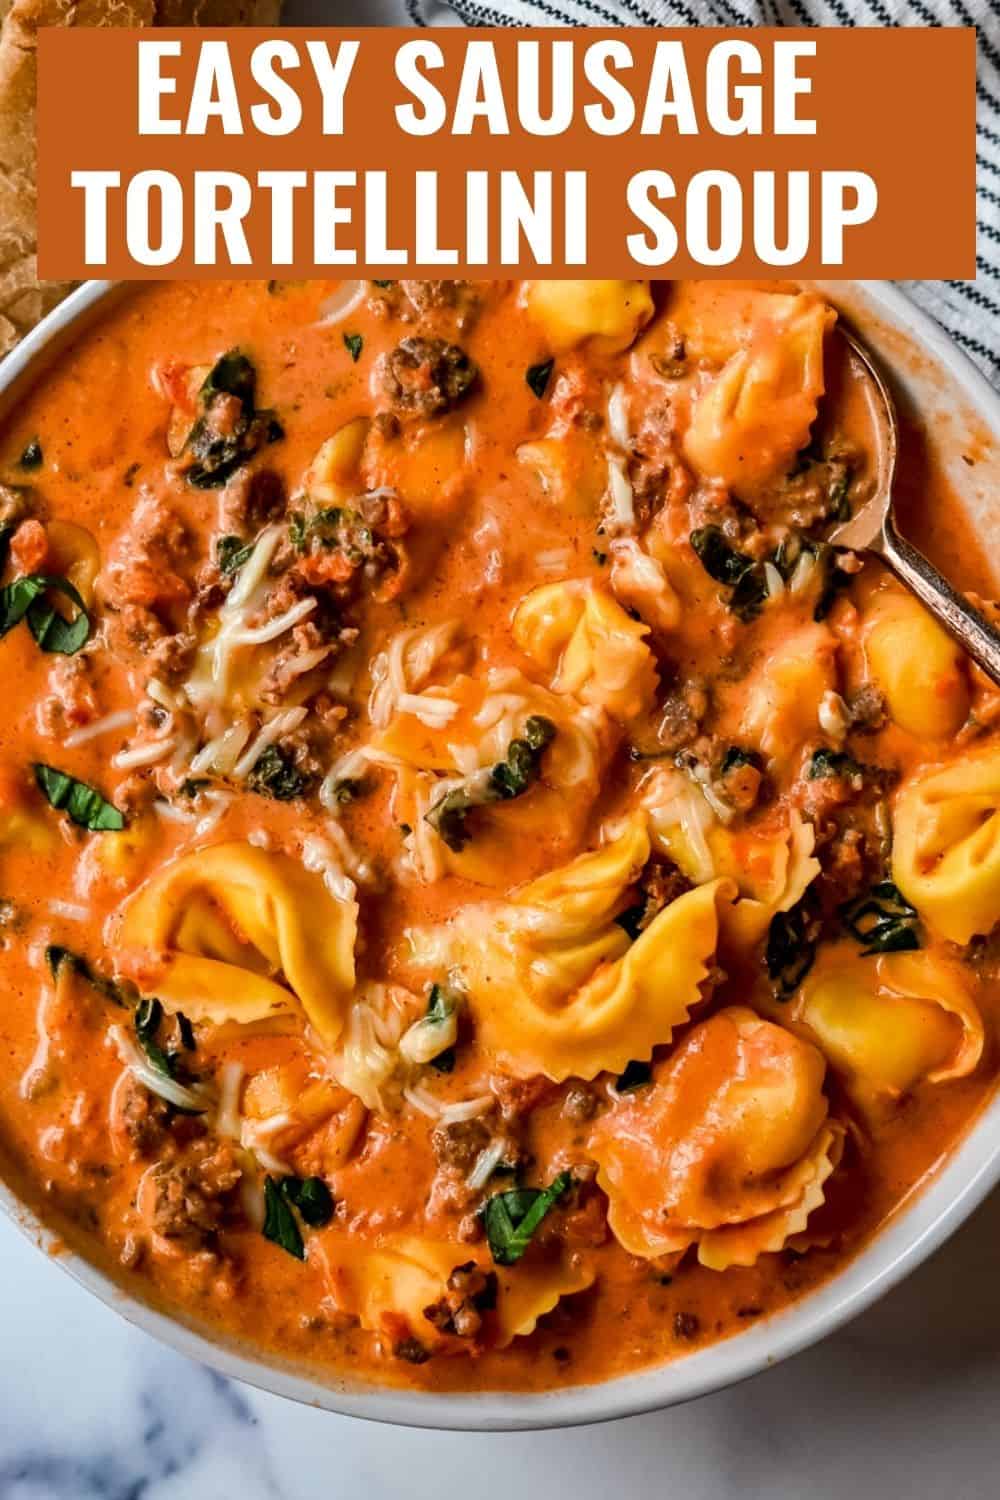 Creamy Sausage Tortellini Soup. An easy 6-ingredient Sausage Tortellini Soup is a family favorite. This popular soup recipe can be made on the stovetop or in a slow cooker. Rich, creamy, flavorful soup that everyone raves about!